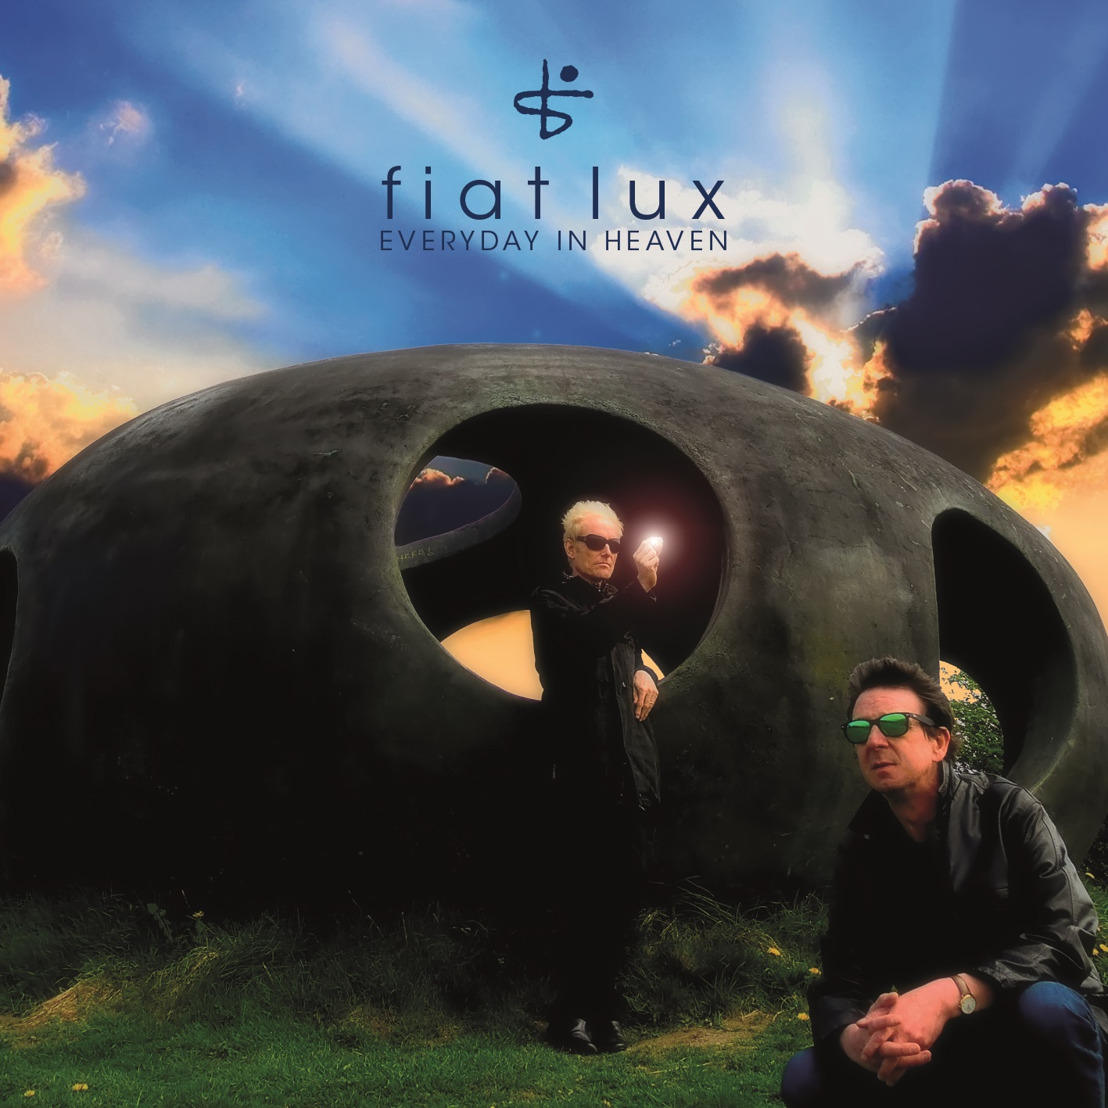 The remarkable comeback of FIAT LUX — the great lost band set to return